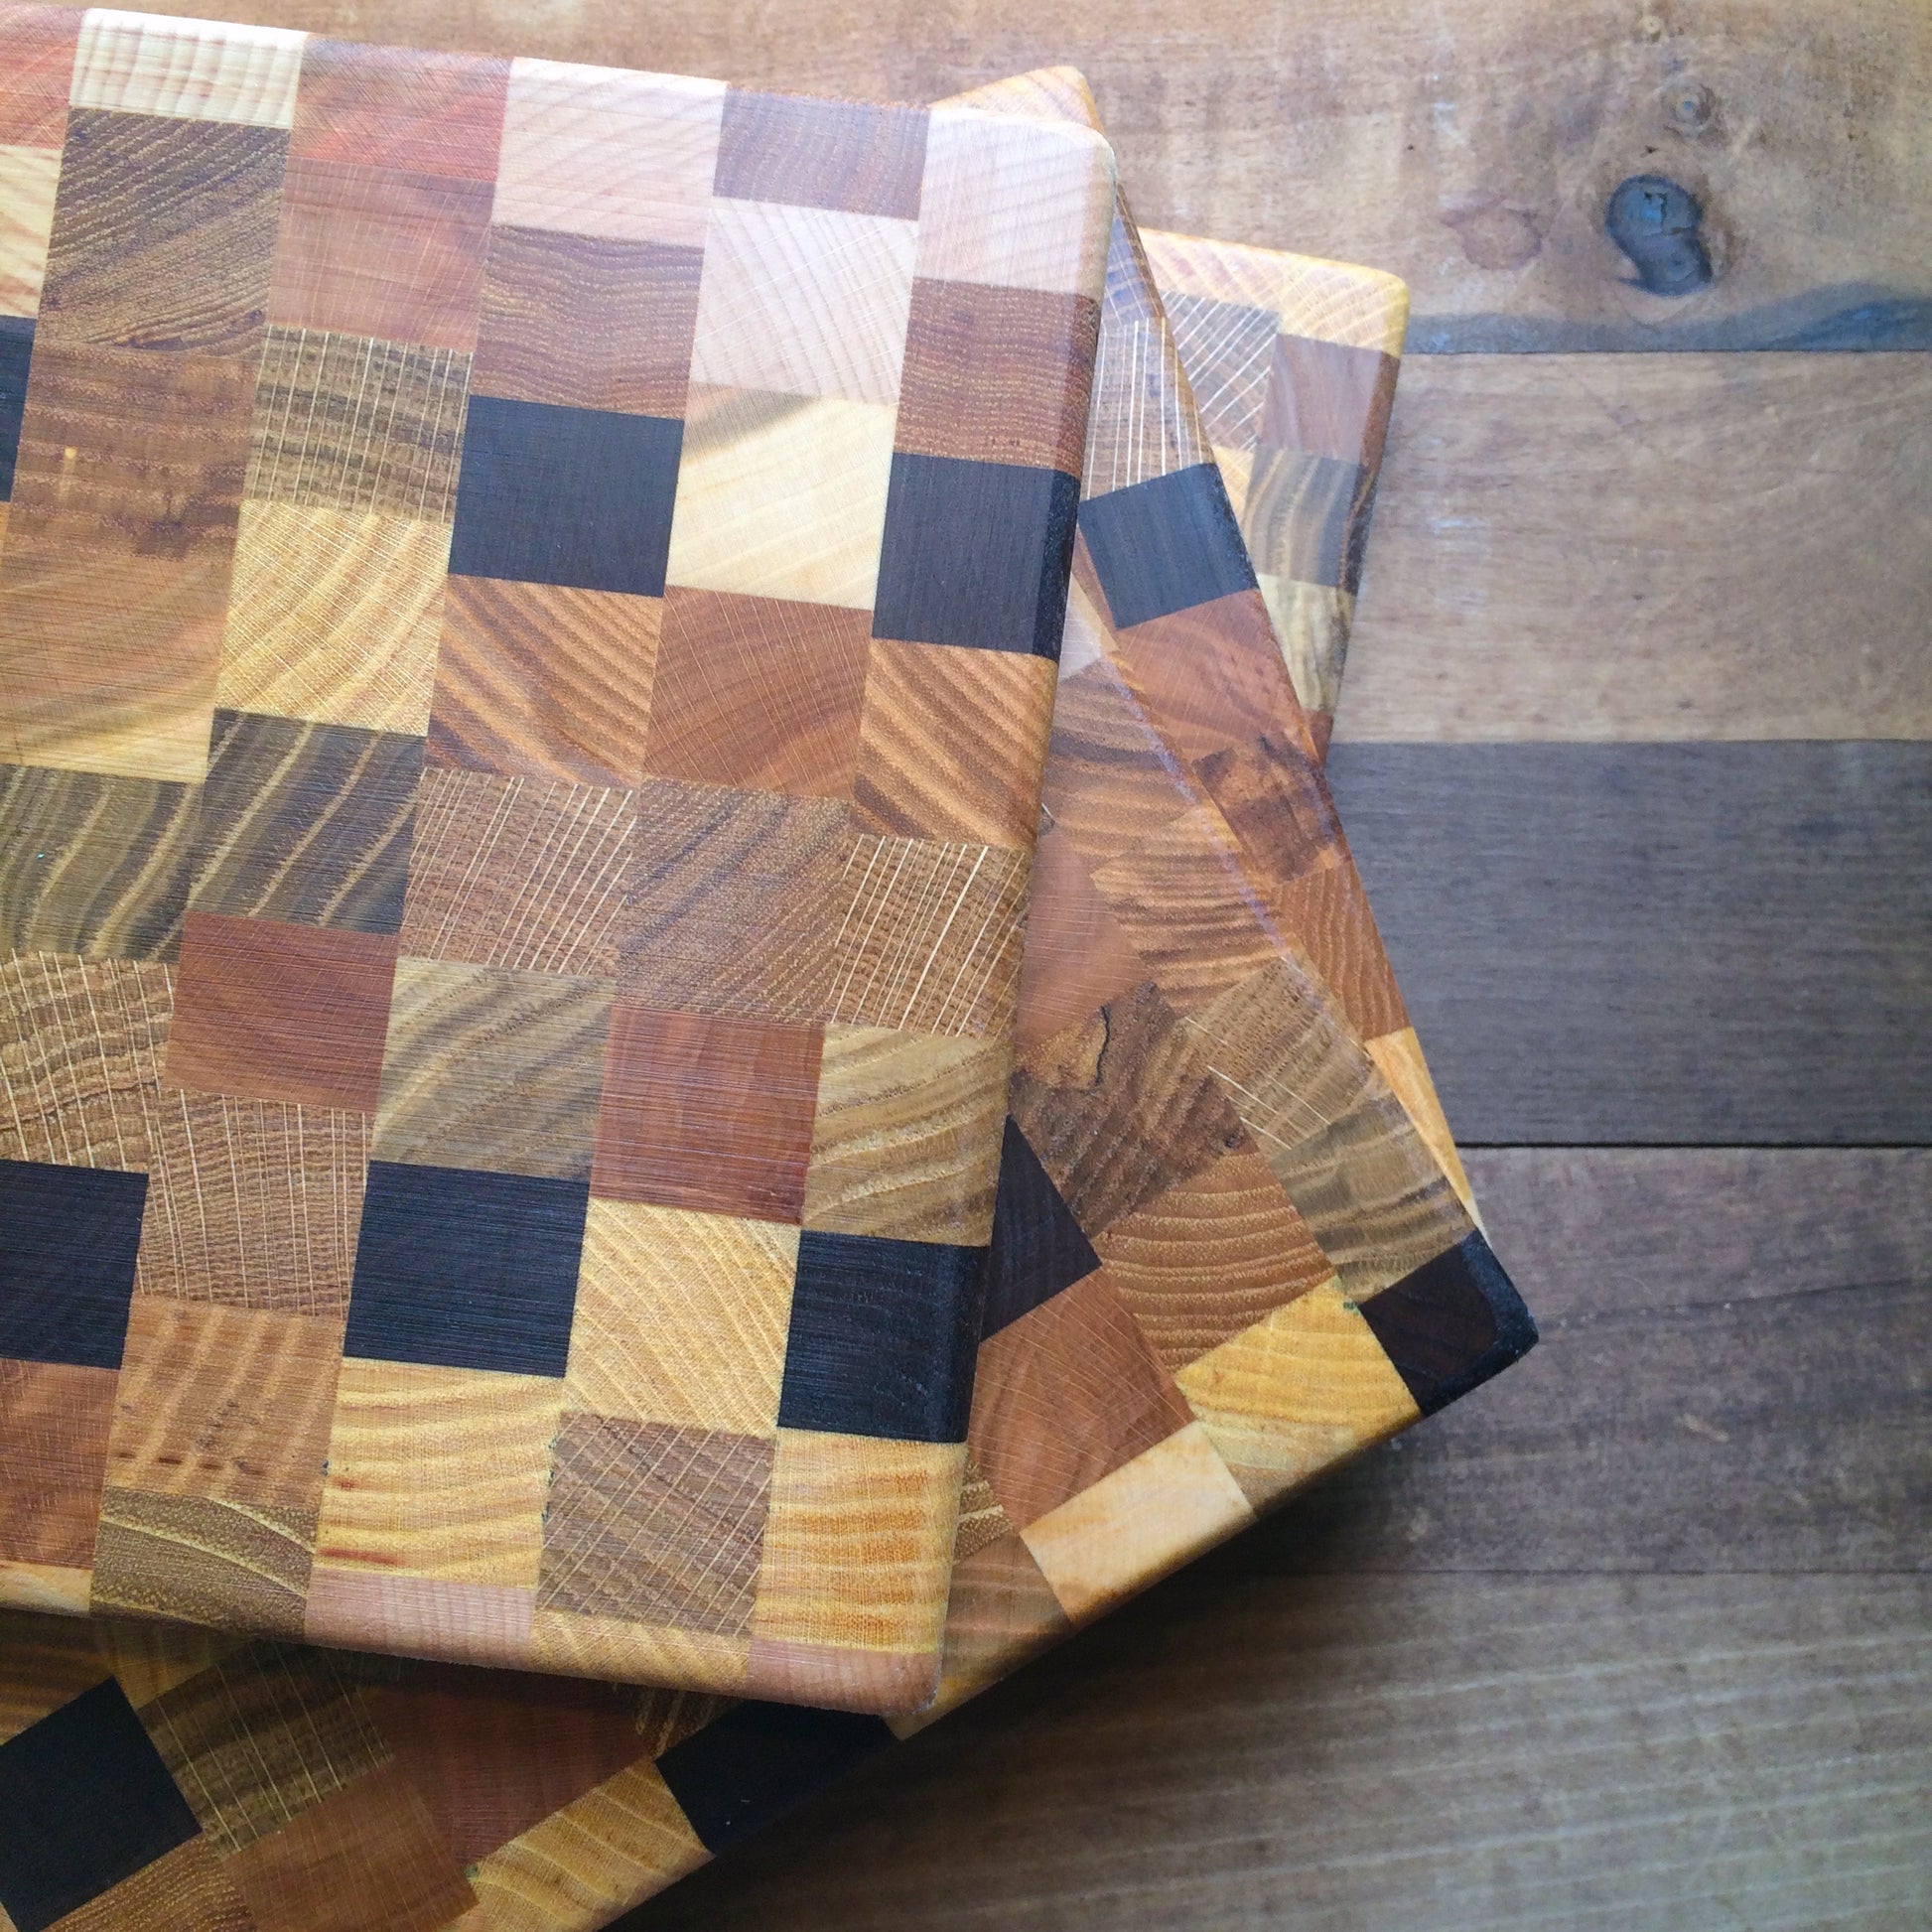 A multicolored end grain Steve Reid Checkerboard Wood Cutting Board displayed on a wooden table.